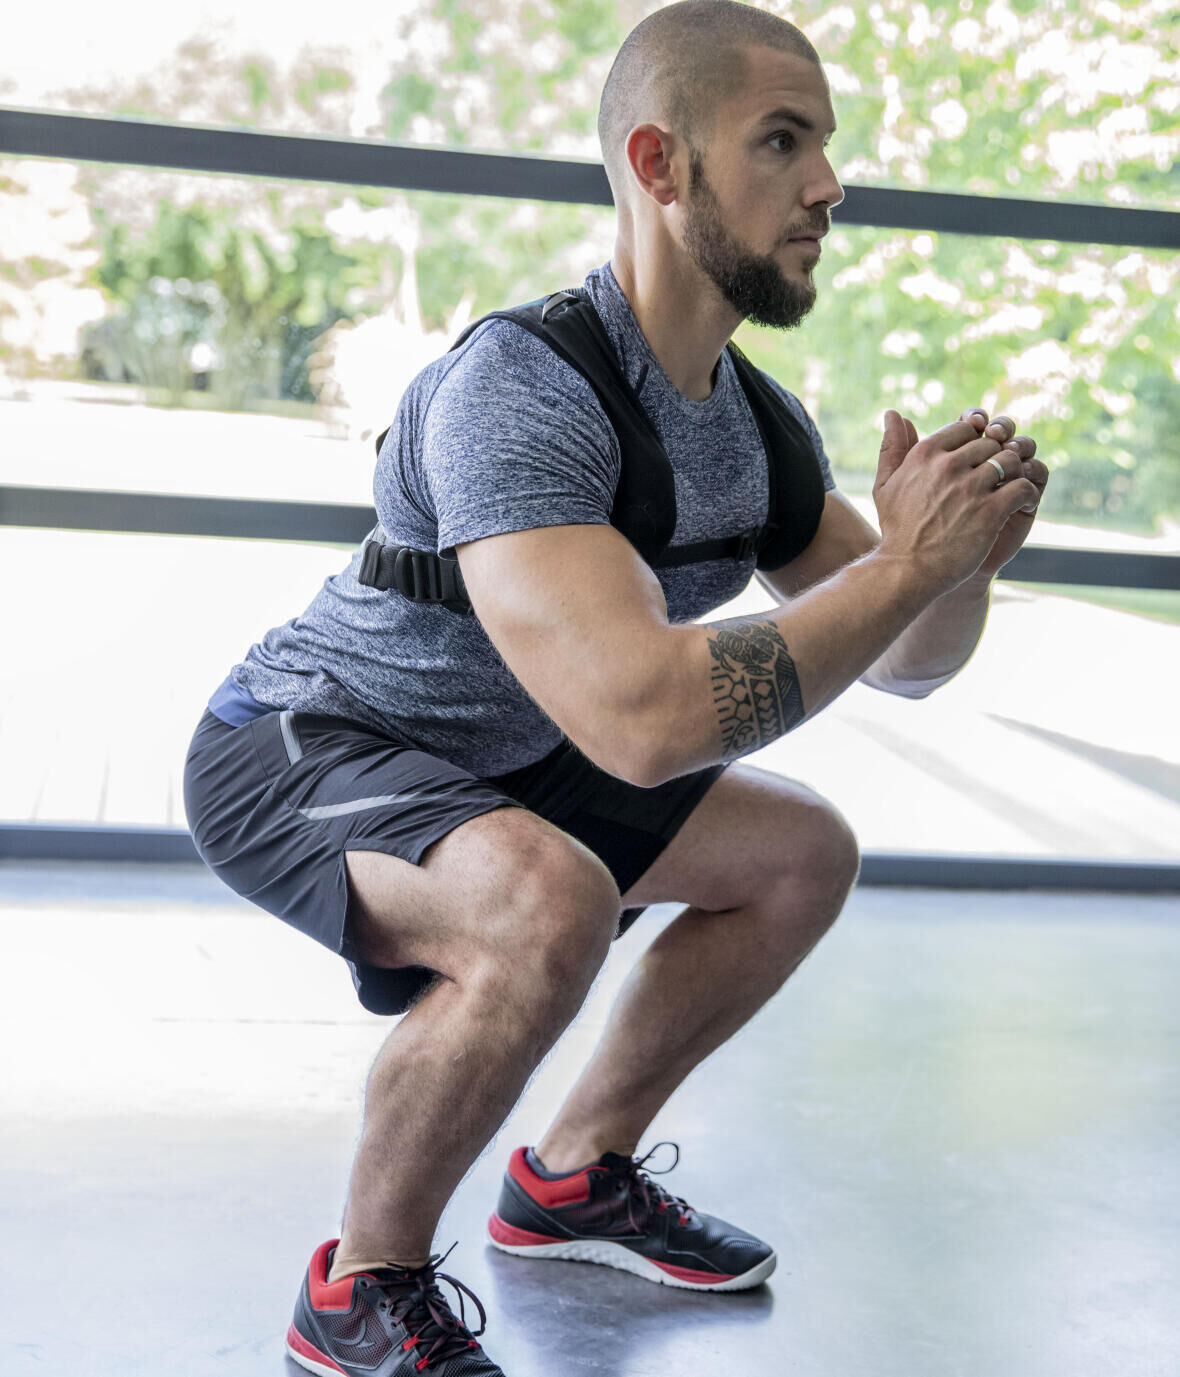 Squats to build strengthen your legs